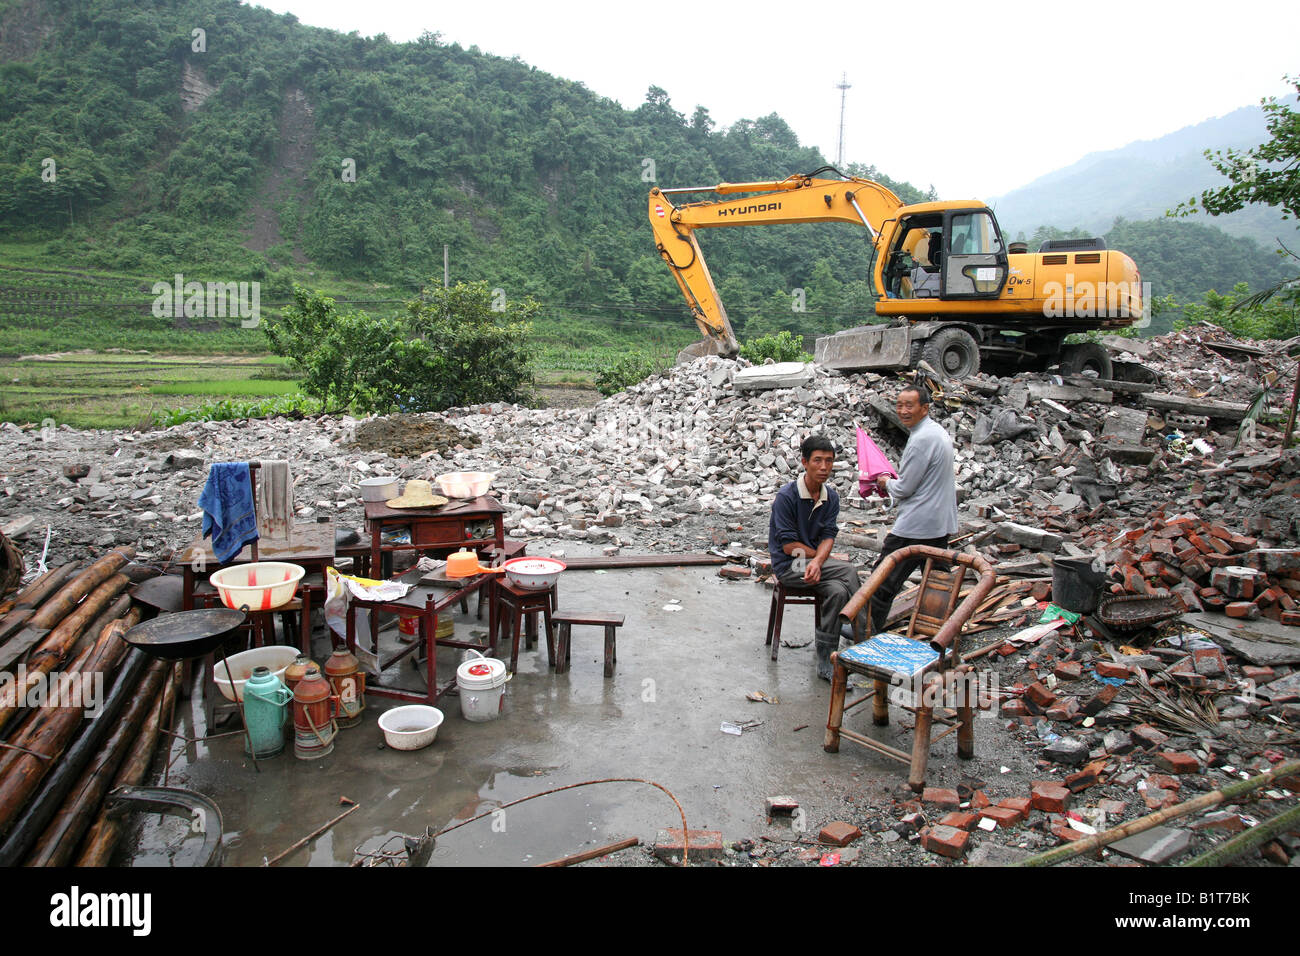 A man sits in the remains of what used to be his house in Pengzhou following the Sichuan Earthquake of 12th May 2008, China Stock Photo